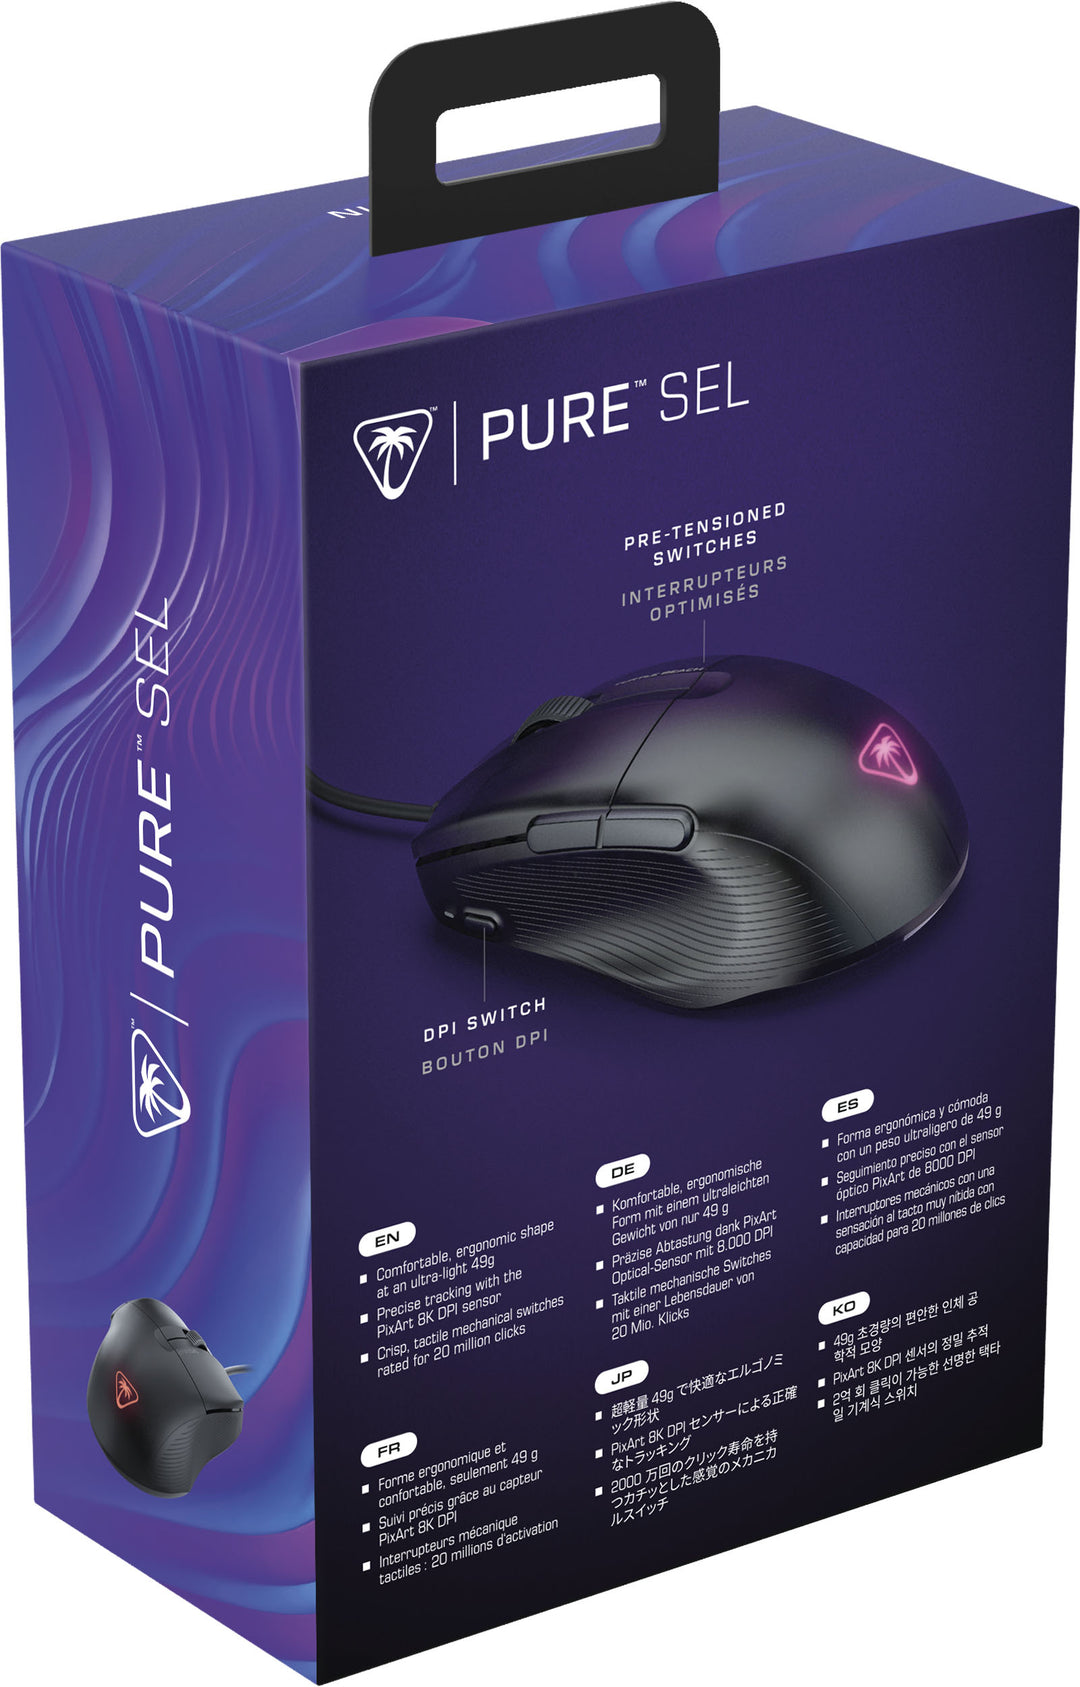 Turtle Beach - Pure SEL Ultra-Light Wired Ergonomic RGB Gaming Mouse with 8K DPI Optical Sensor & Mechanical Switches - Black_8